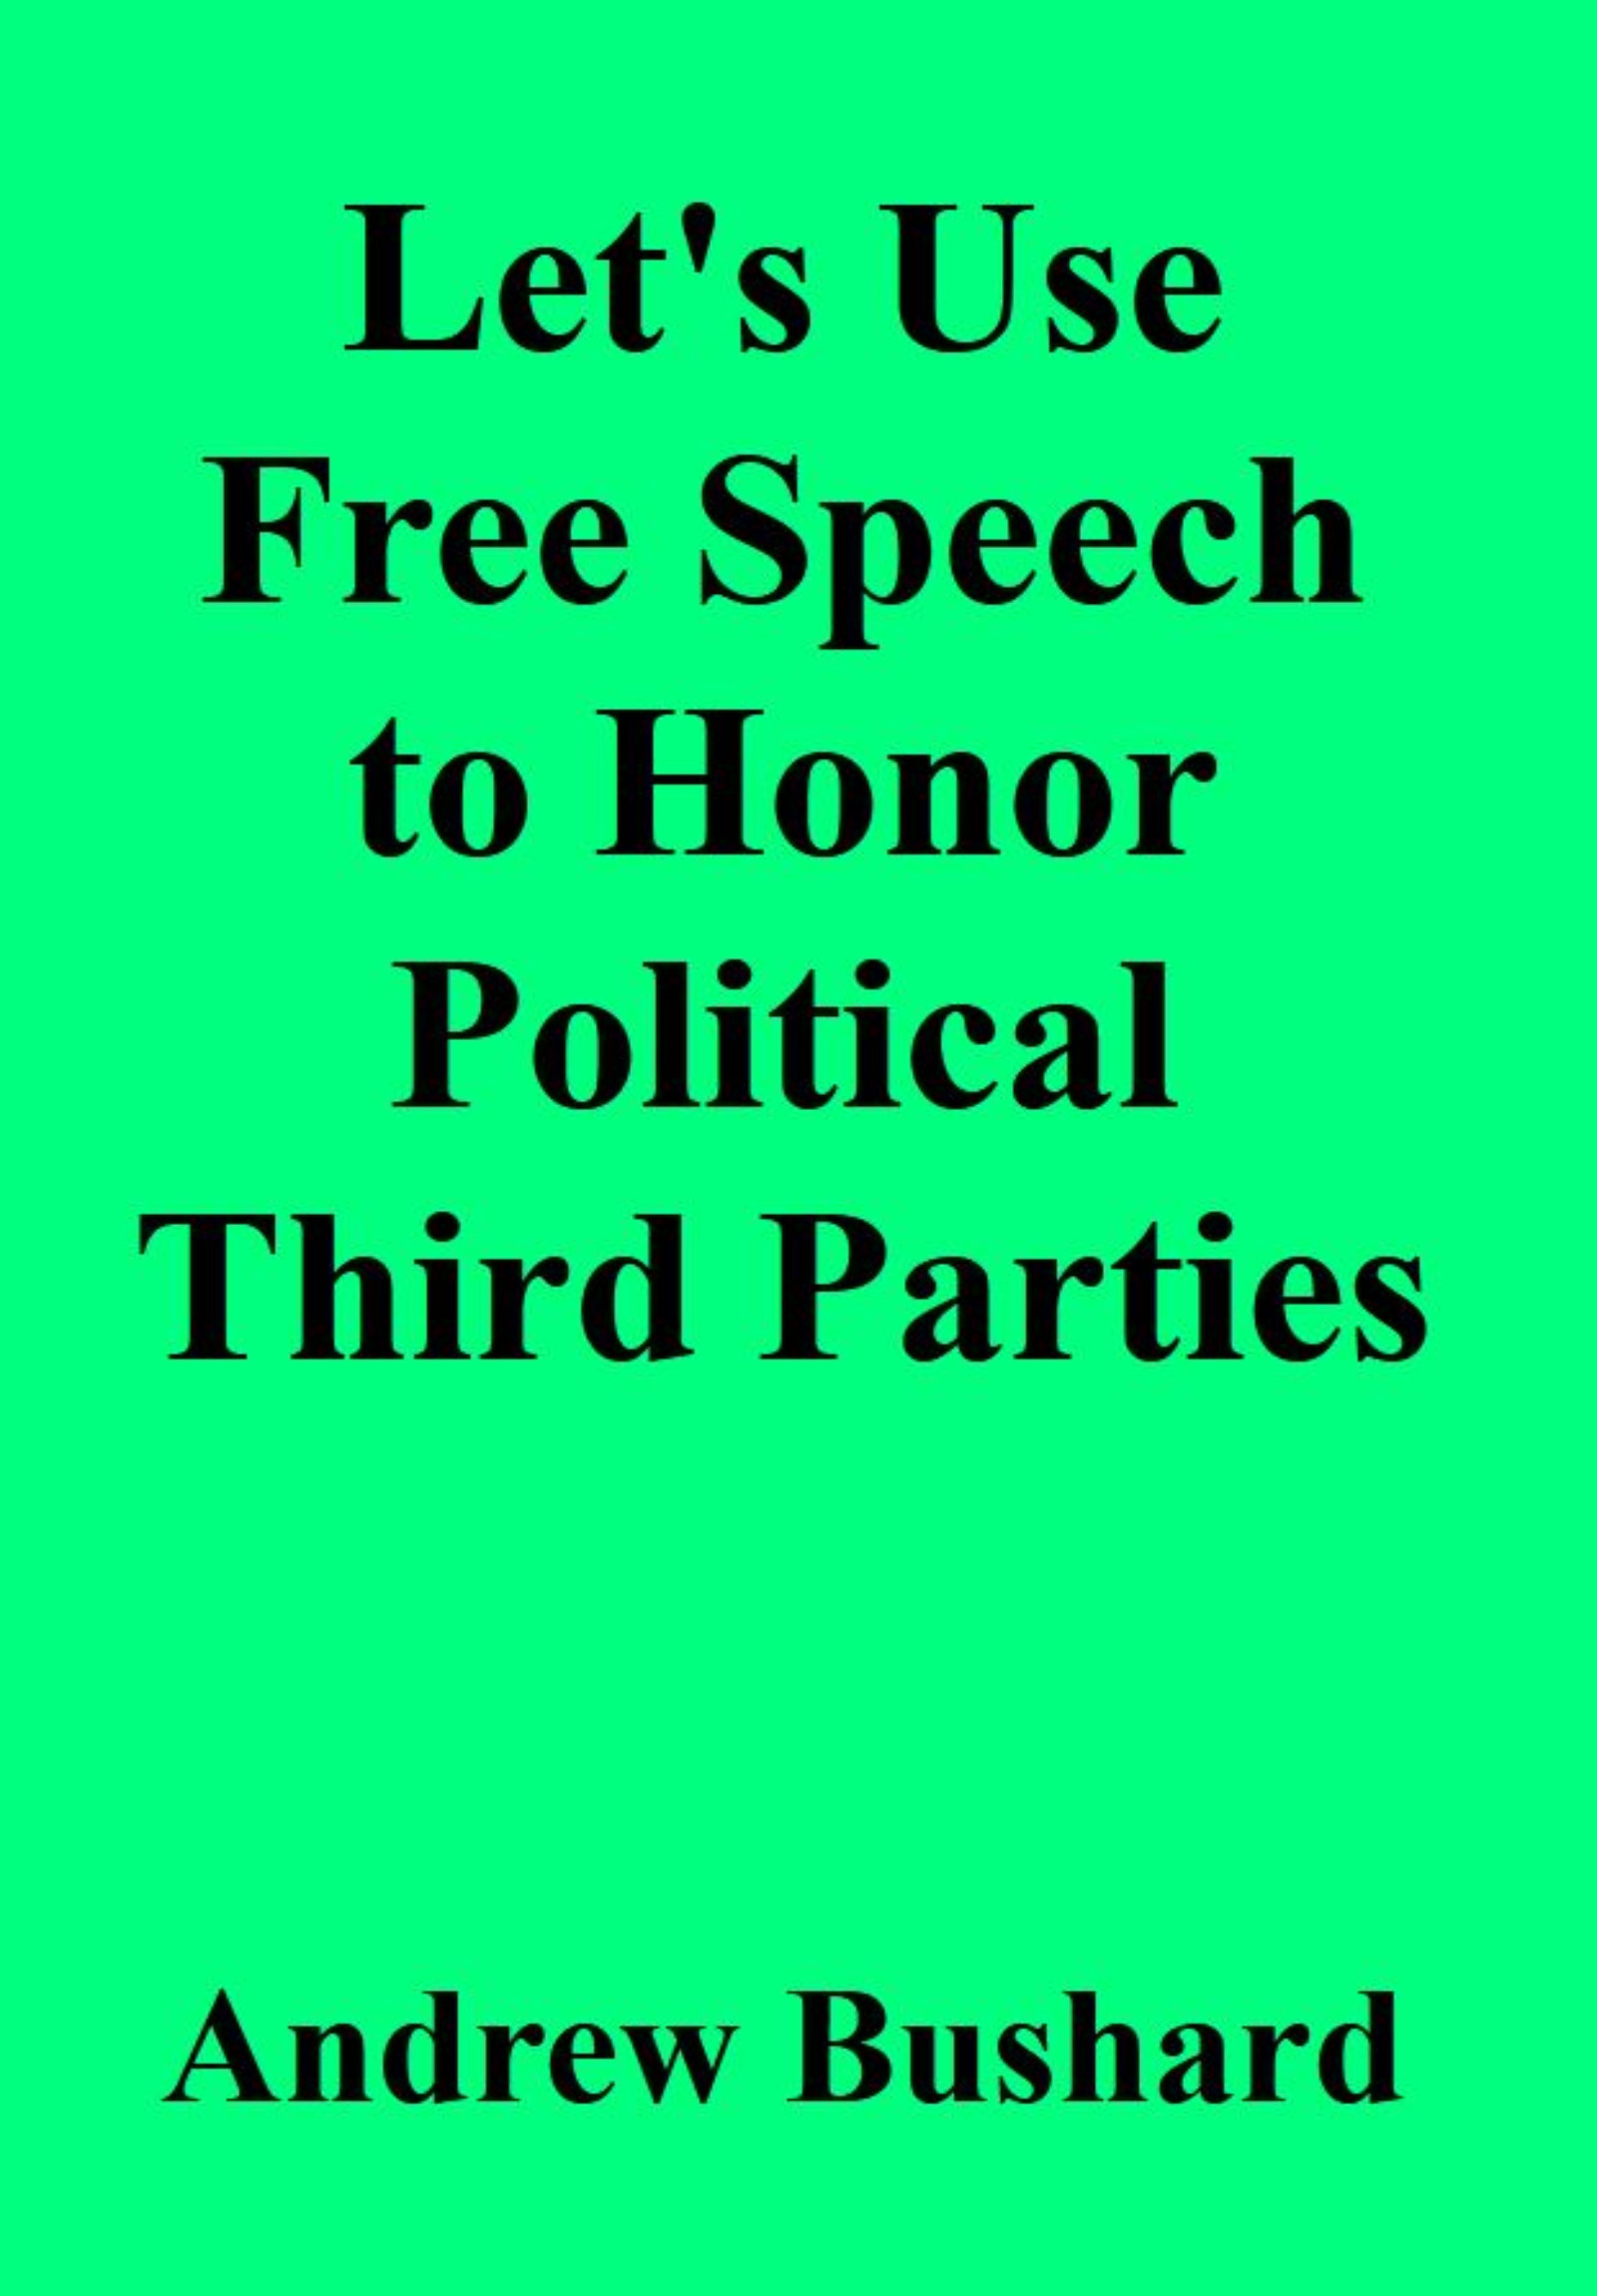 Let's Use Free Speech to Honor Political Third Parties's featured image